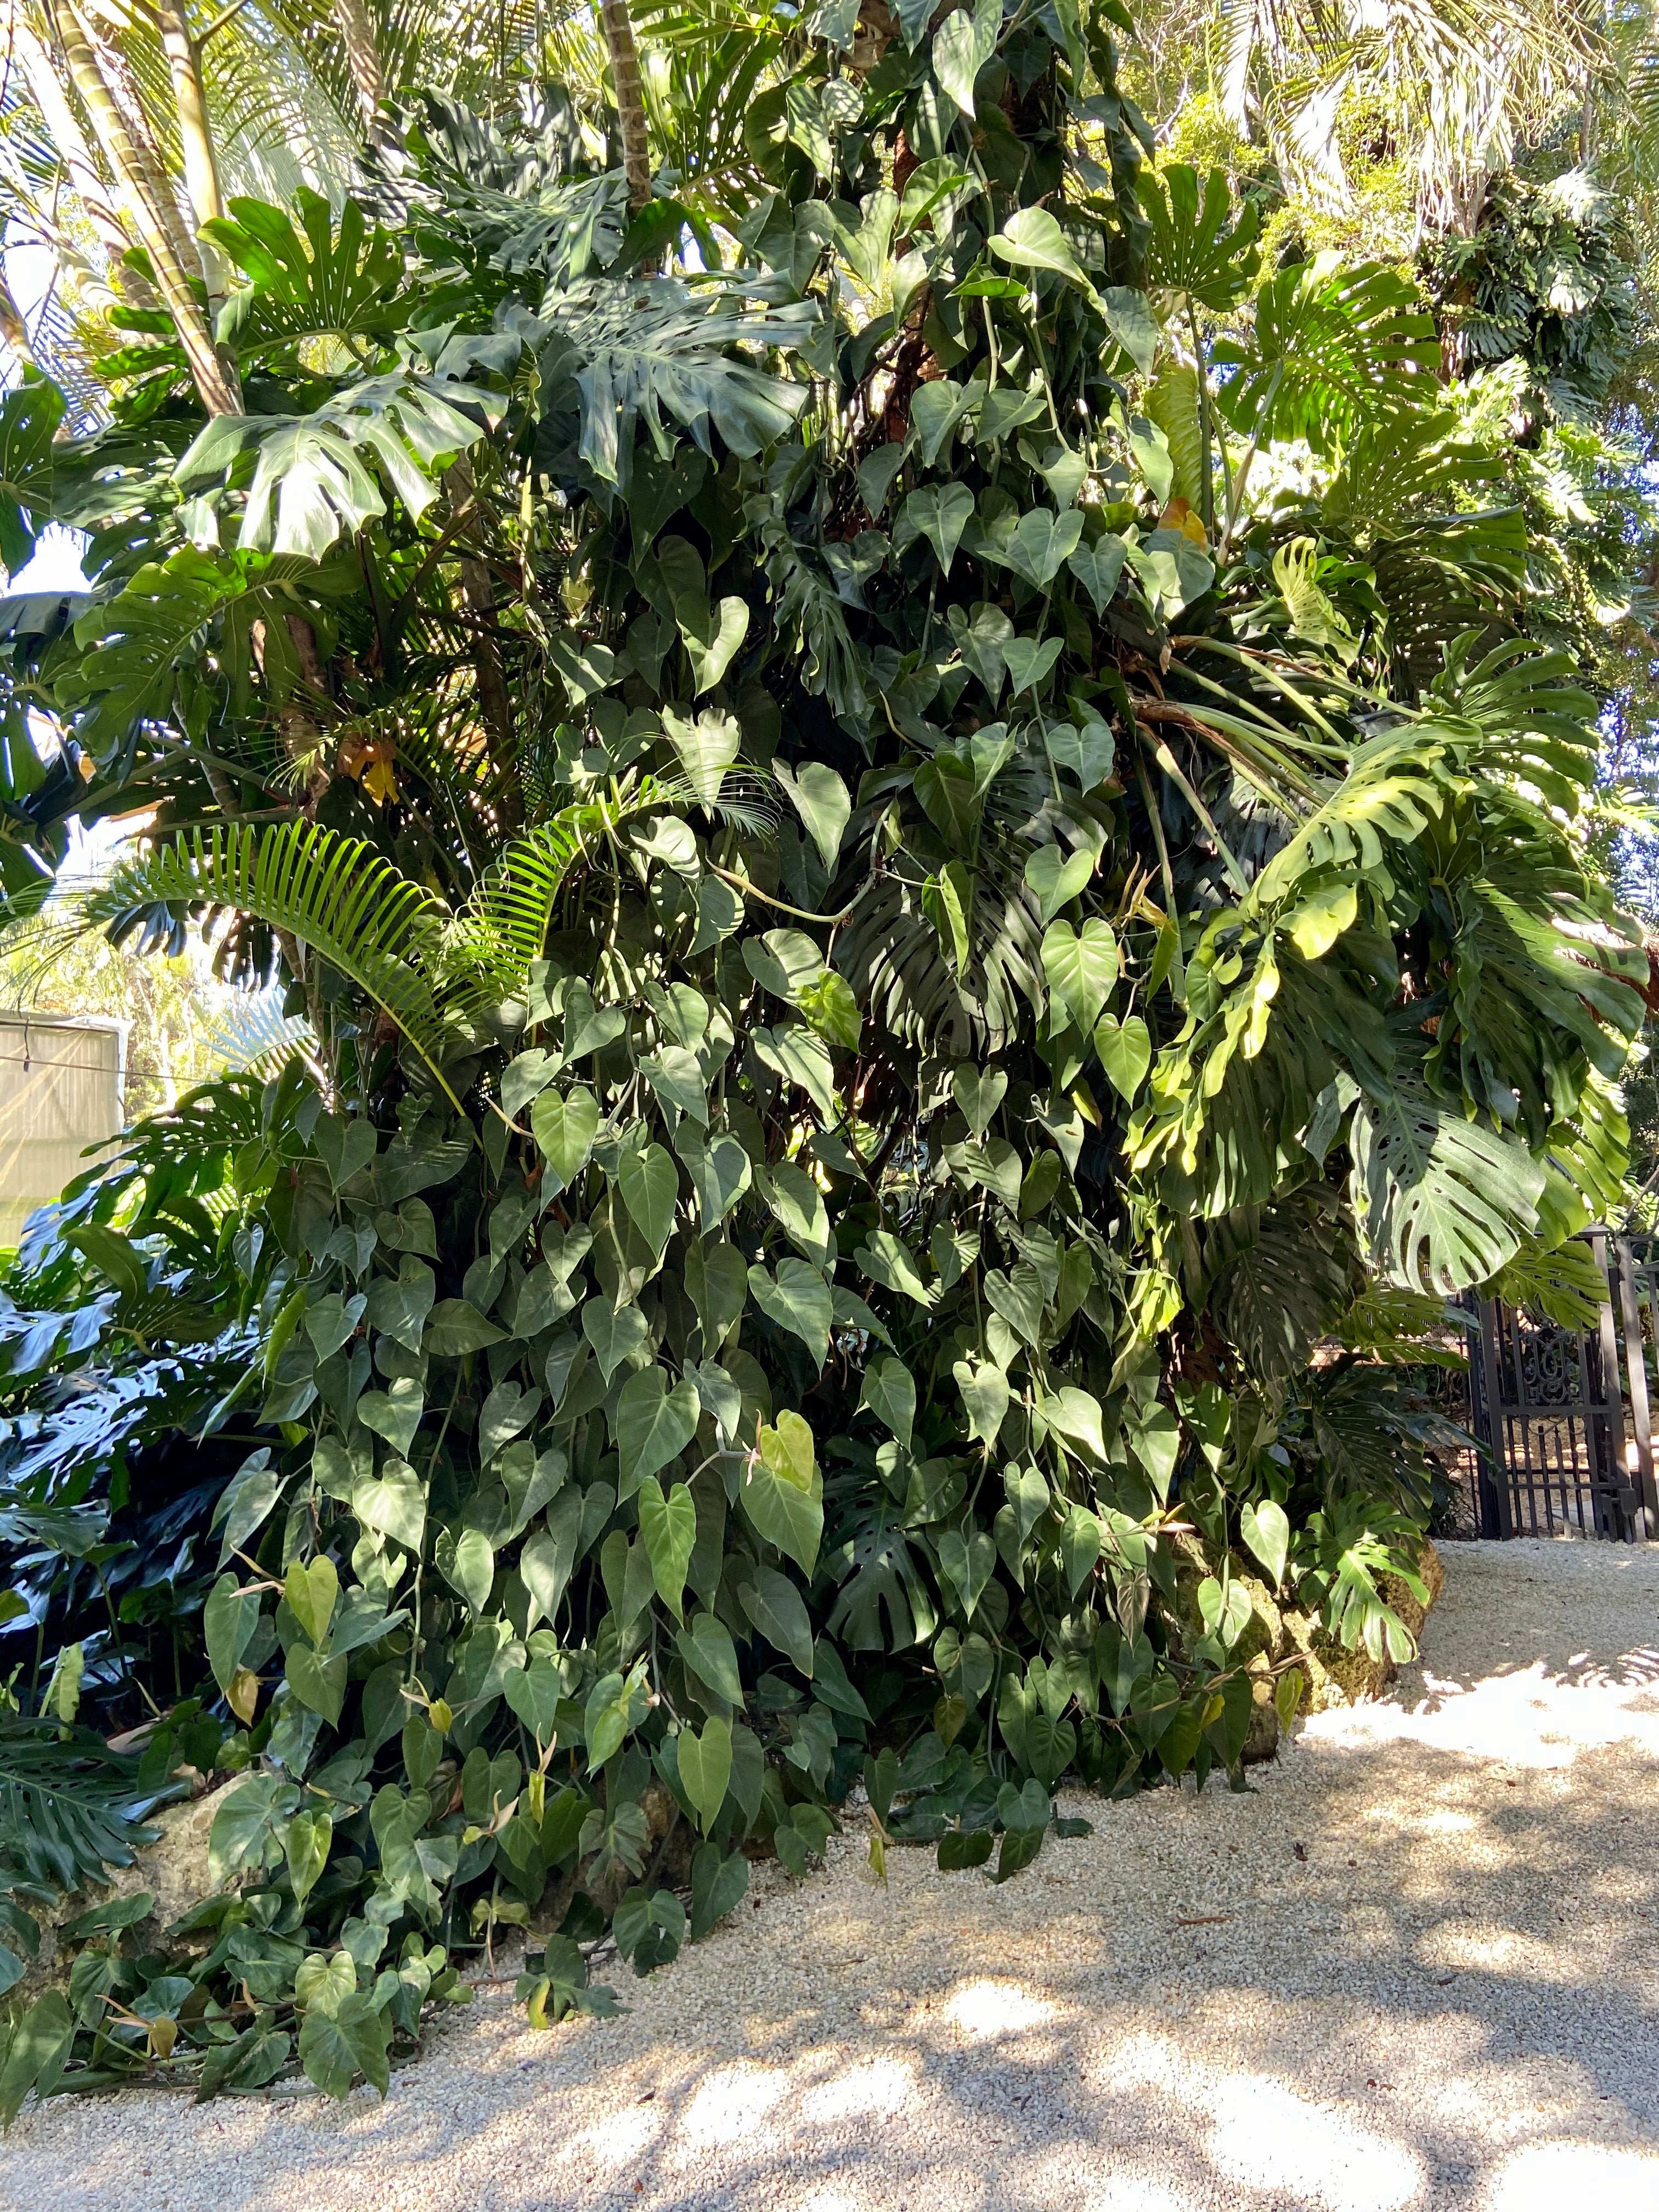 Philodendron cordatum growing up a tree with vines.